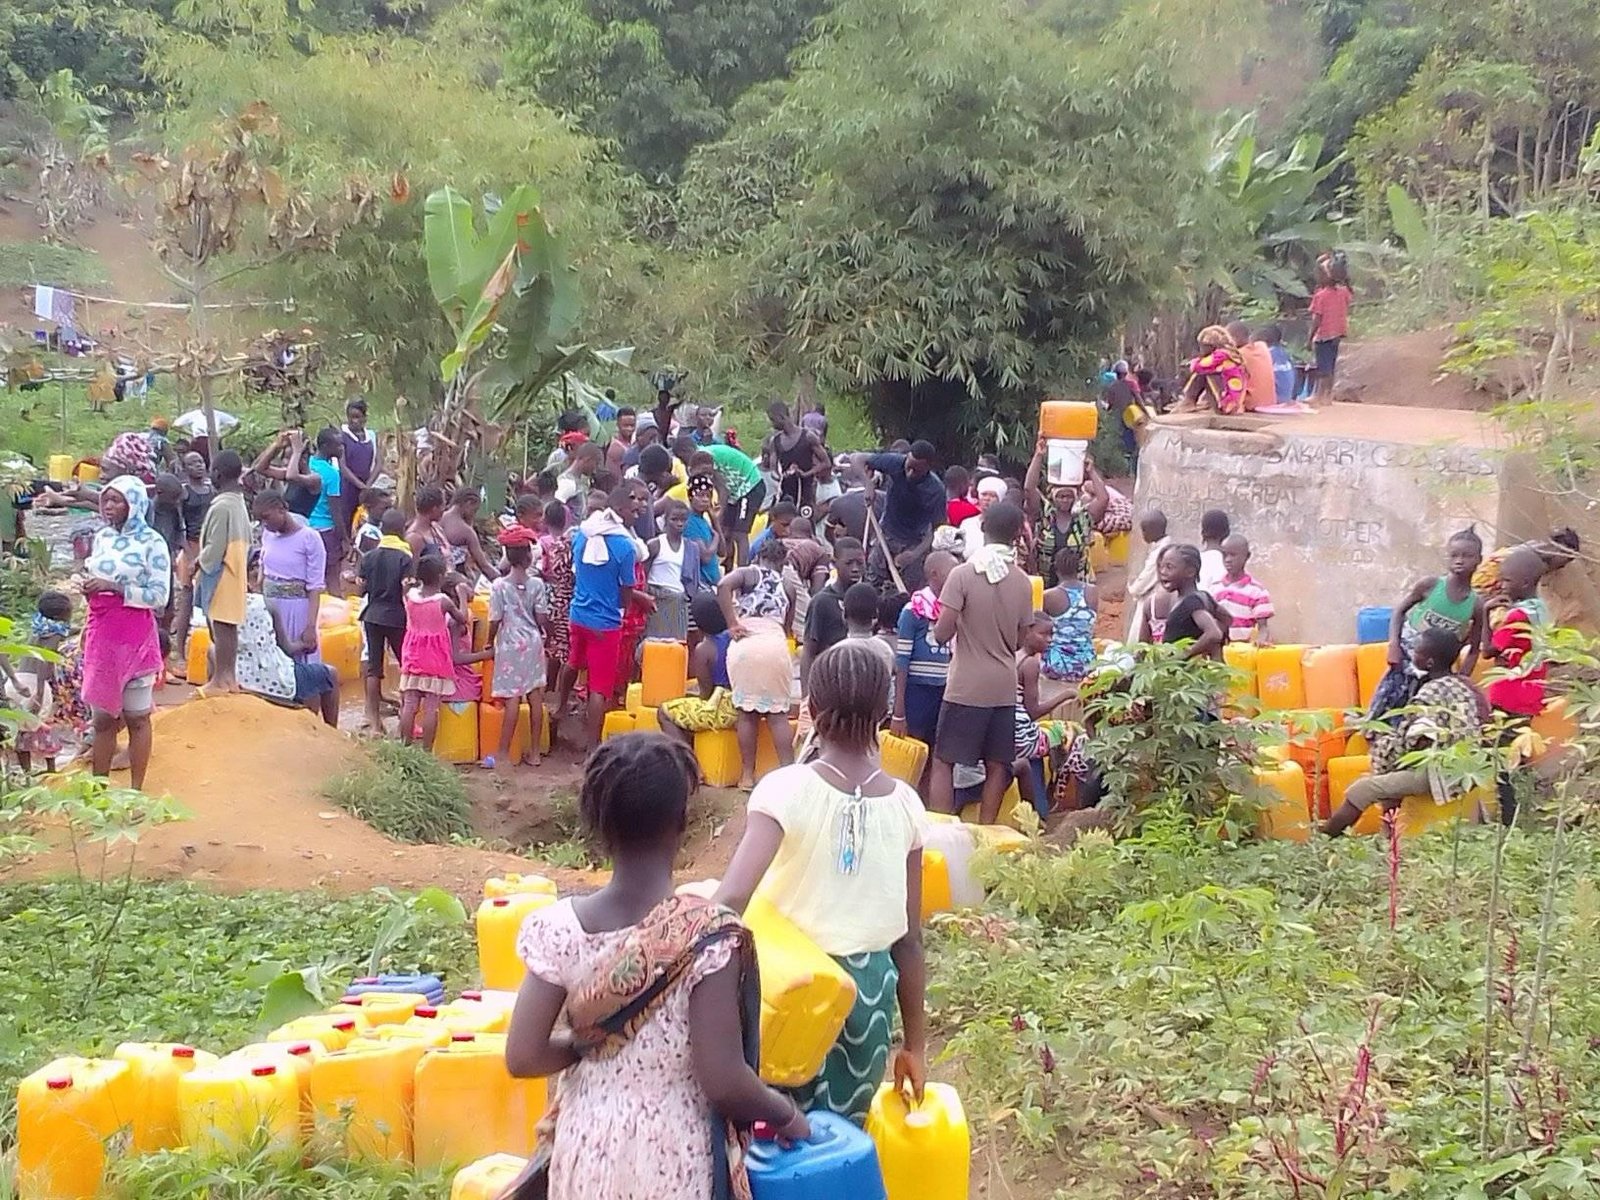 Here are some children and women waiting in-turns to get water at some wells in March at Fourah Bay College Botanical Garden popularly known as botany at Leicester Road community